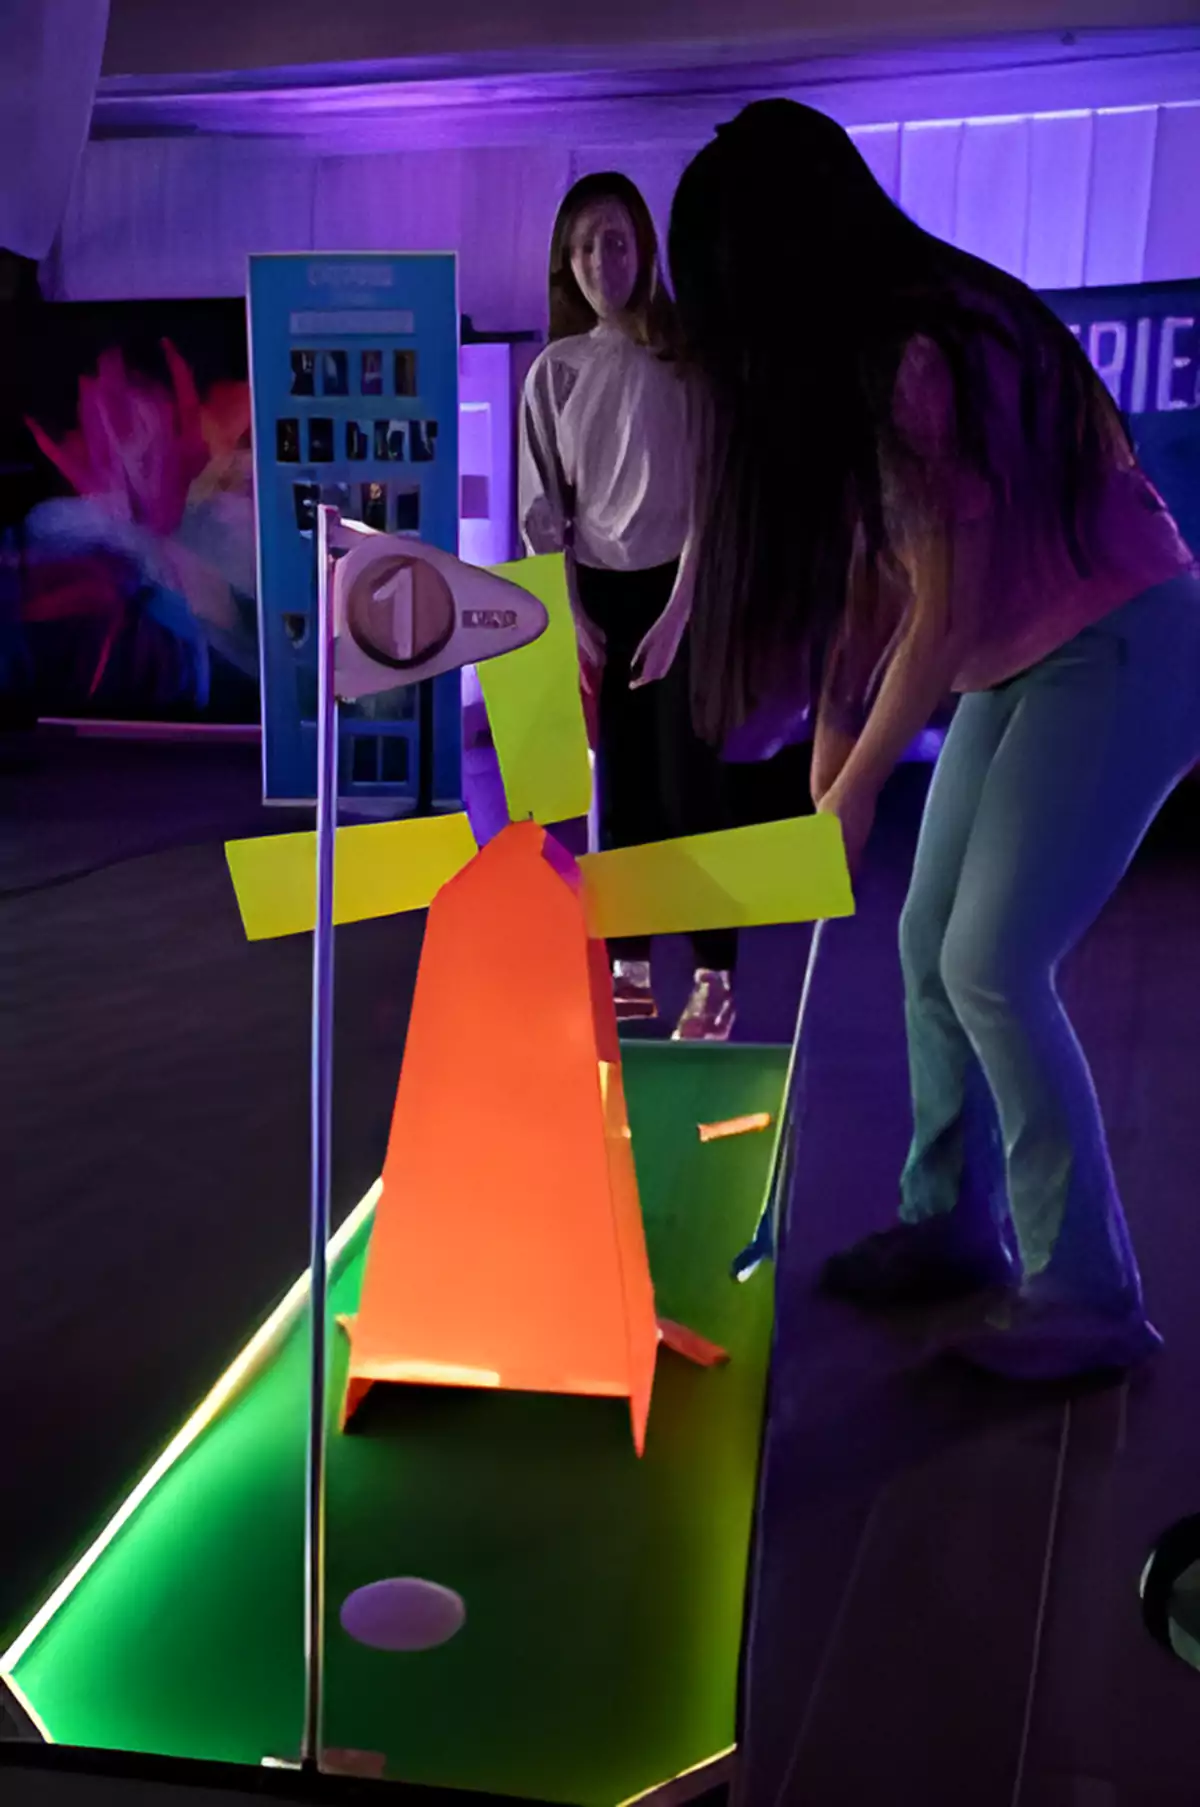 Glo Golf (9 Holes) Interactive Game